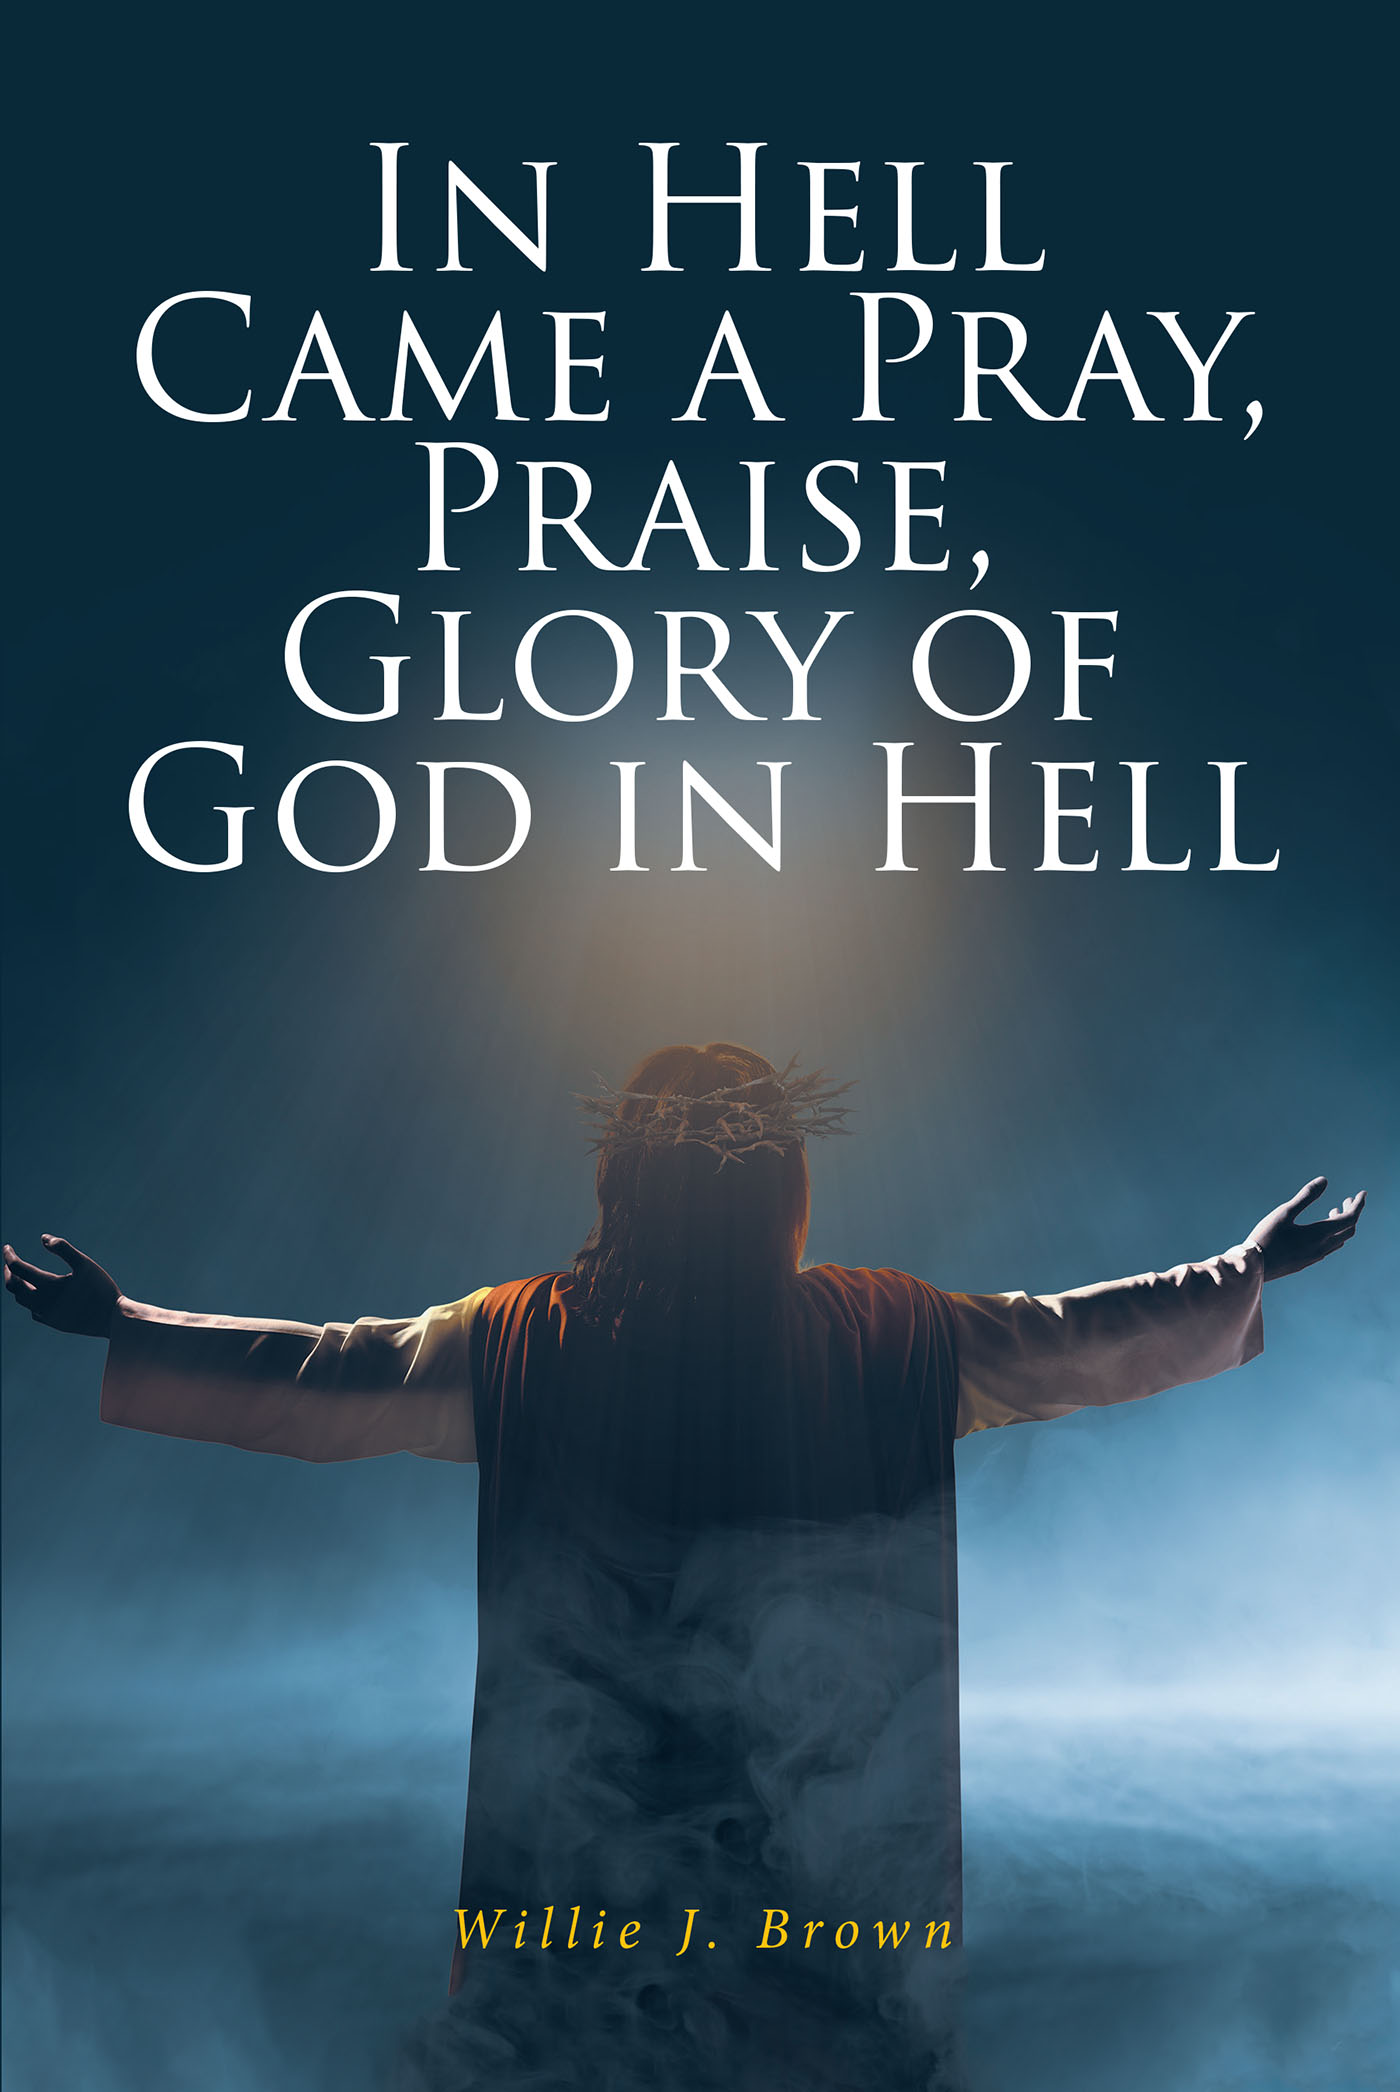 Willie J. Brown’s Newly Released “In Hell Came a Pray, Praise, Glory of God in Hell” is a Thought-Provoking Examination of the Crucifixion and Resurrection